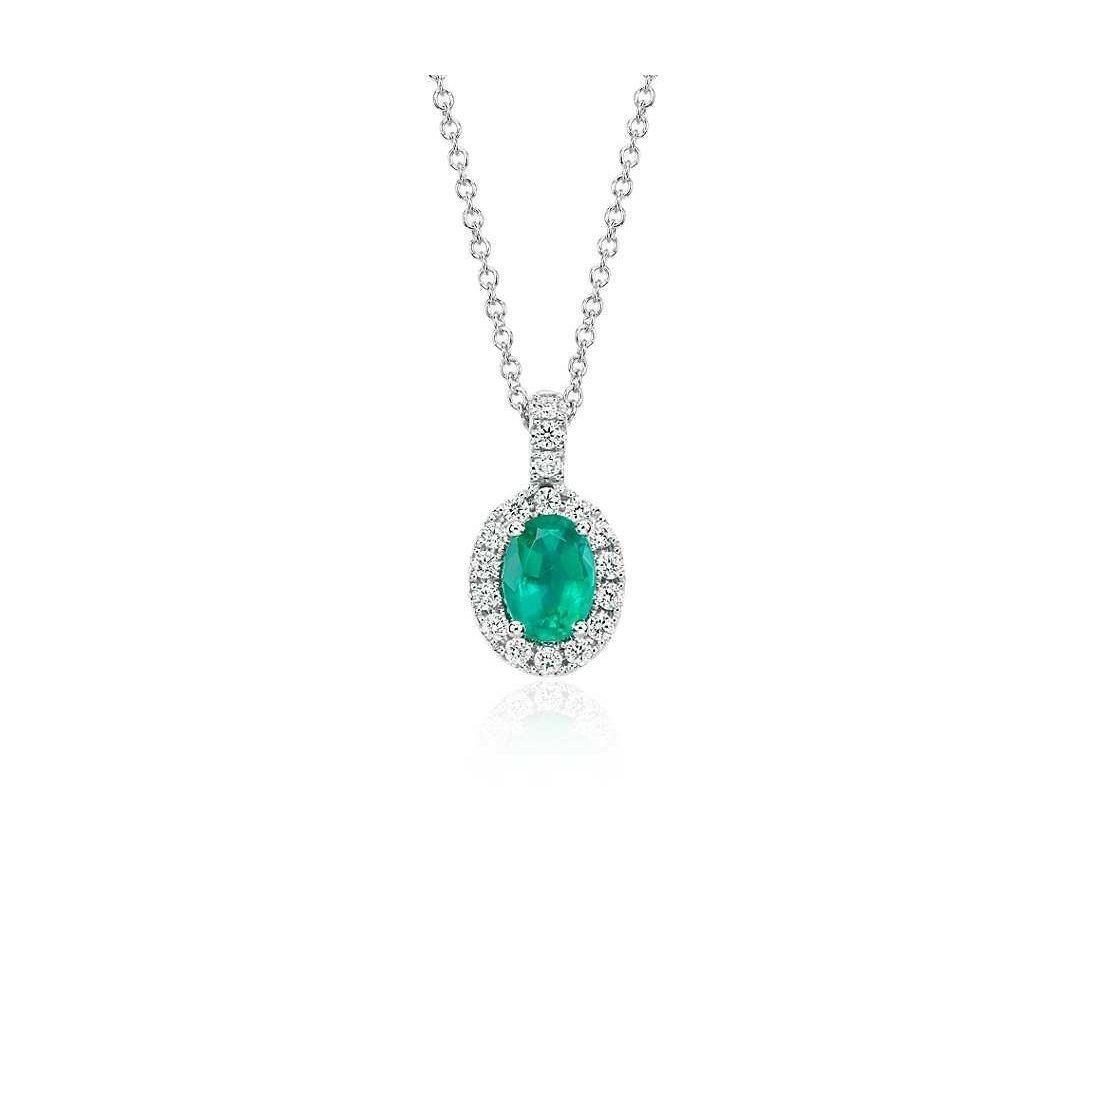 Picture of Harry Chad Enterprises 61715 6.50 CT Green Emerald & Diamond Gemstone Pendant with Chain